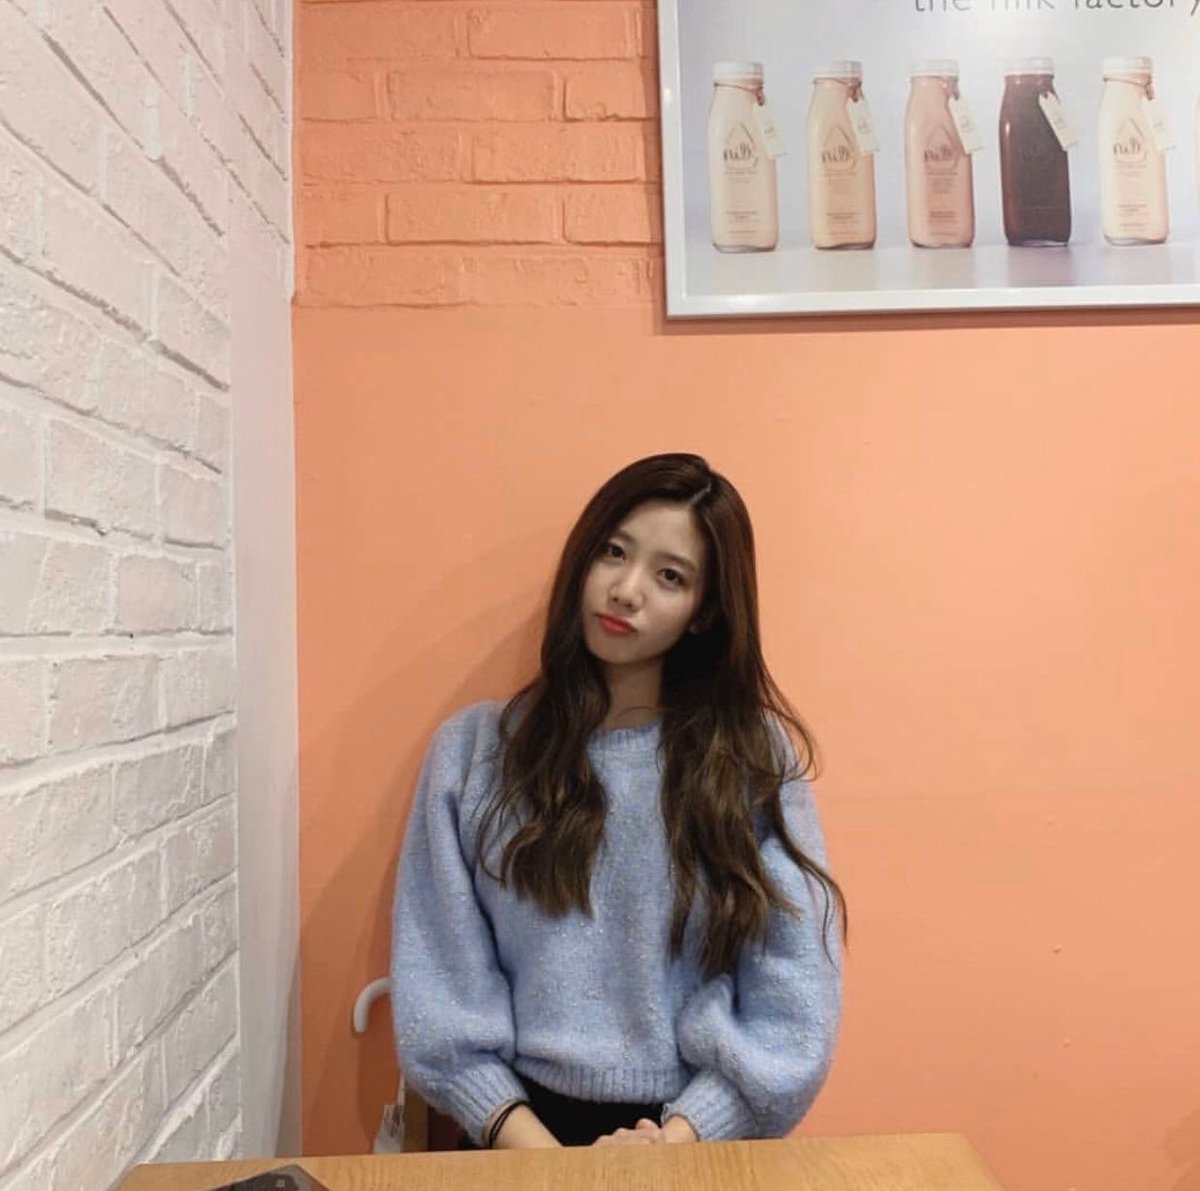 17. Cafe(?) pics pt 3 • I love the blue sweater omg • these are such cute pics • pretty realistic yea rating 8/10